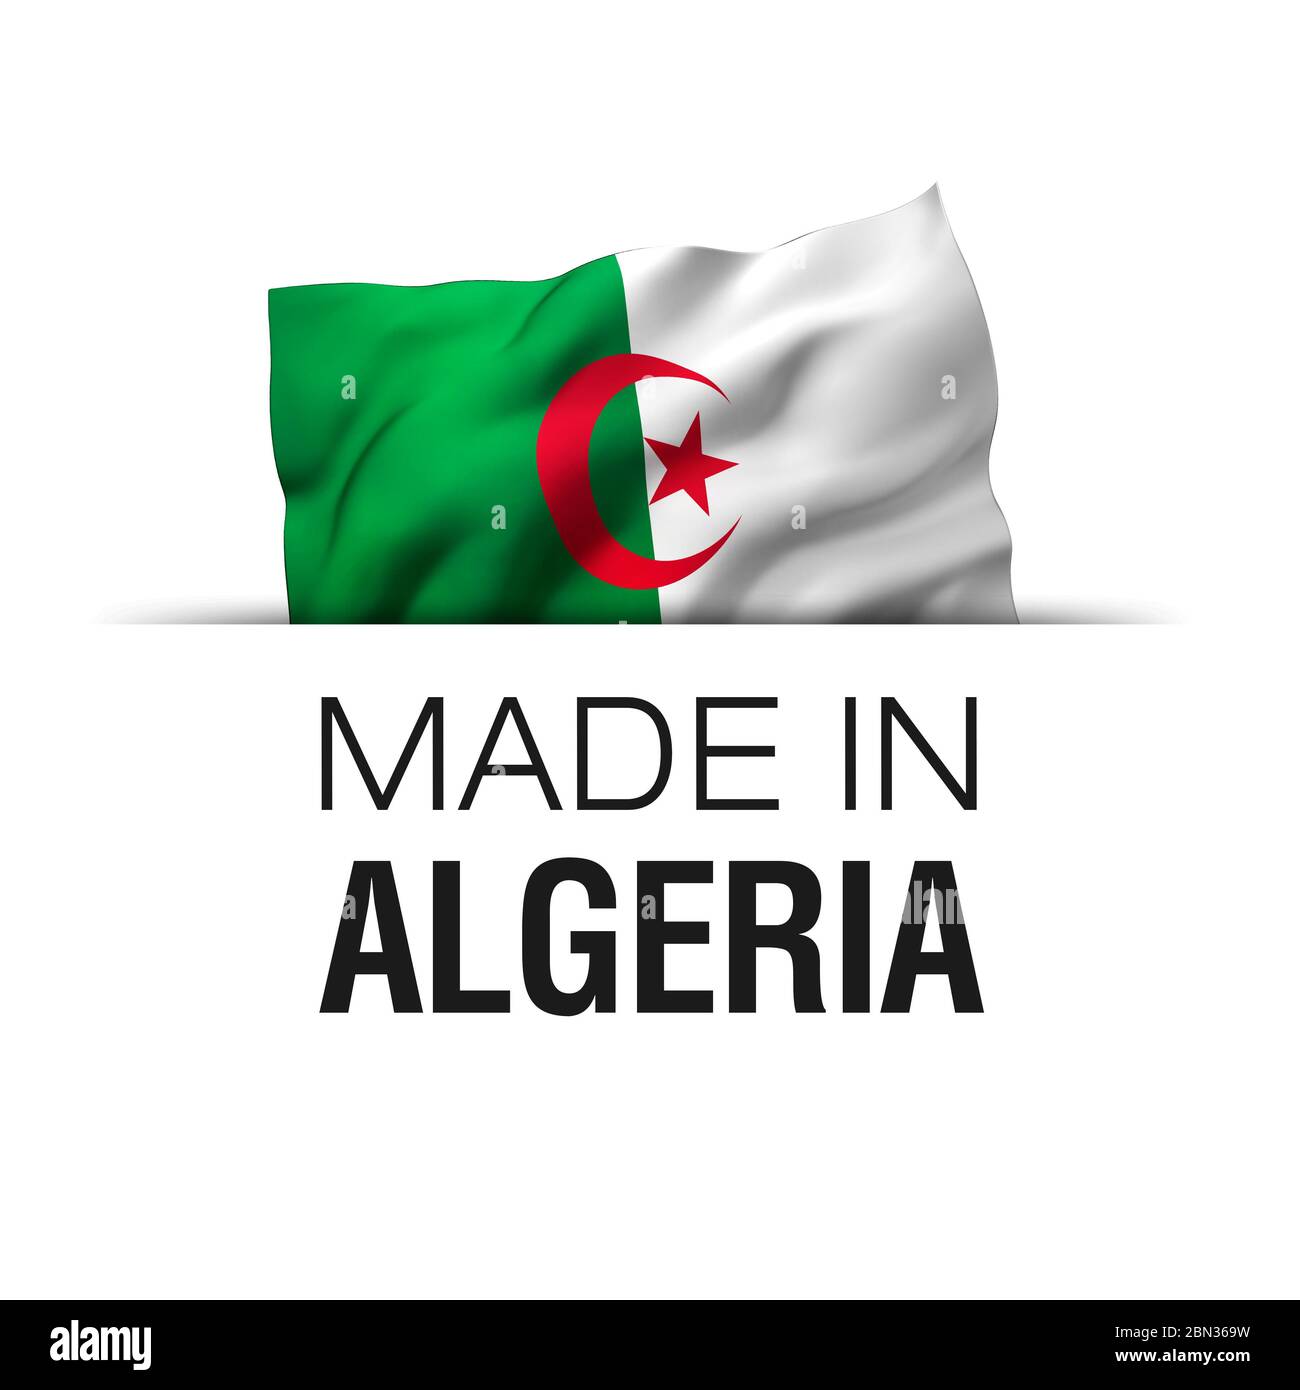 Made in Algeria - Guarantee label with a waving Algerian flag. 3D illustration. Stock Photo